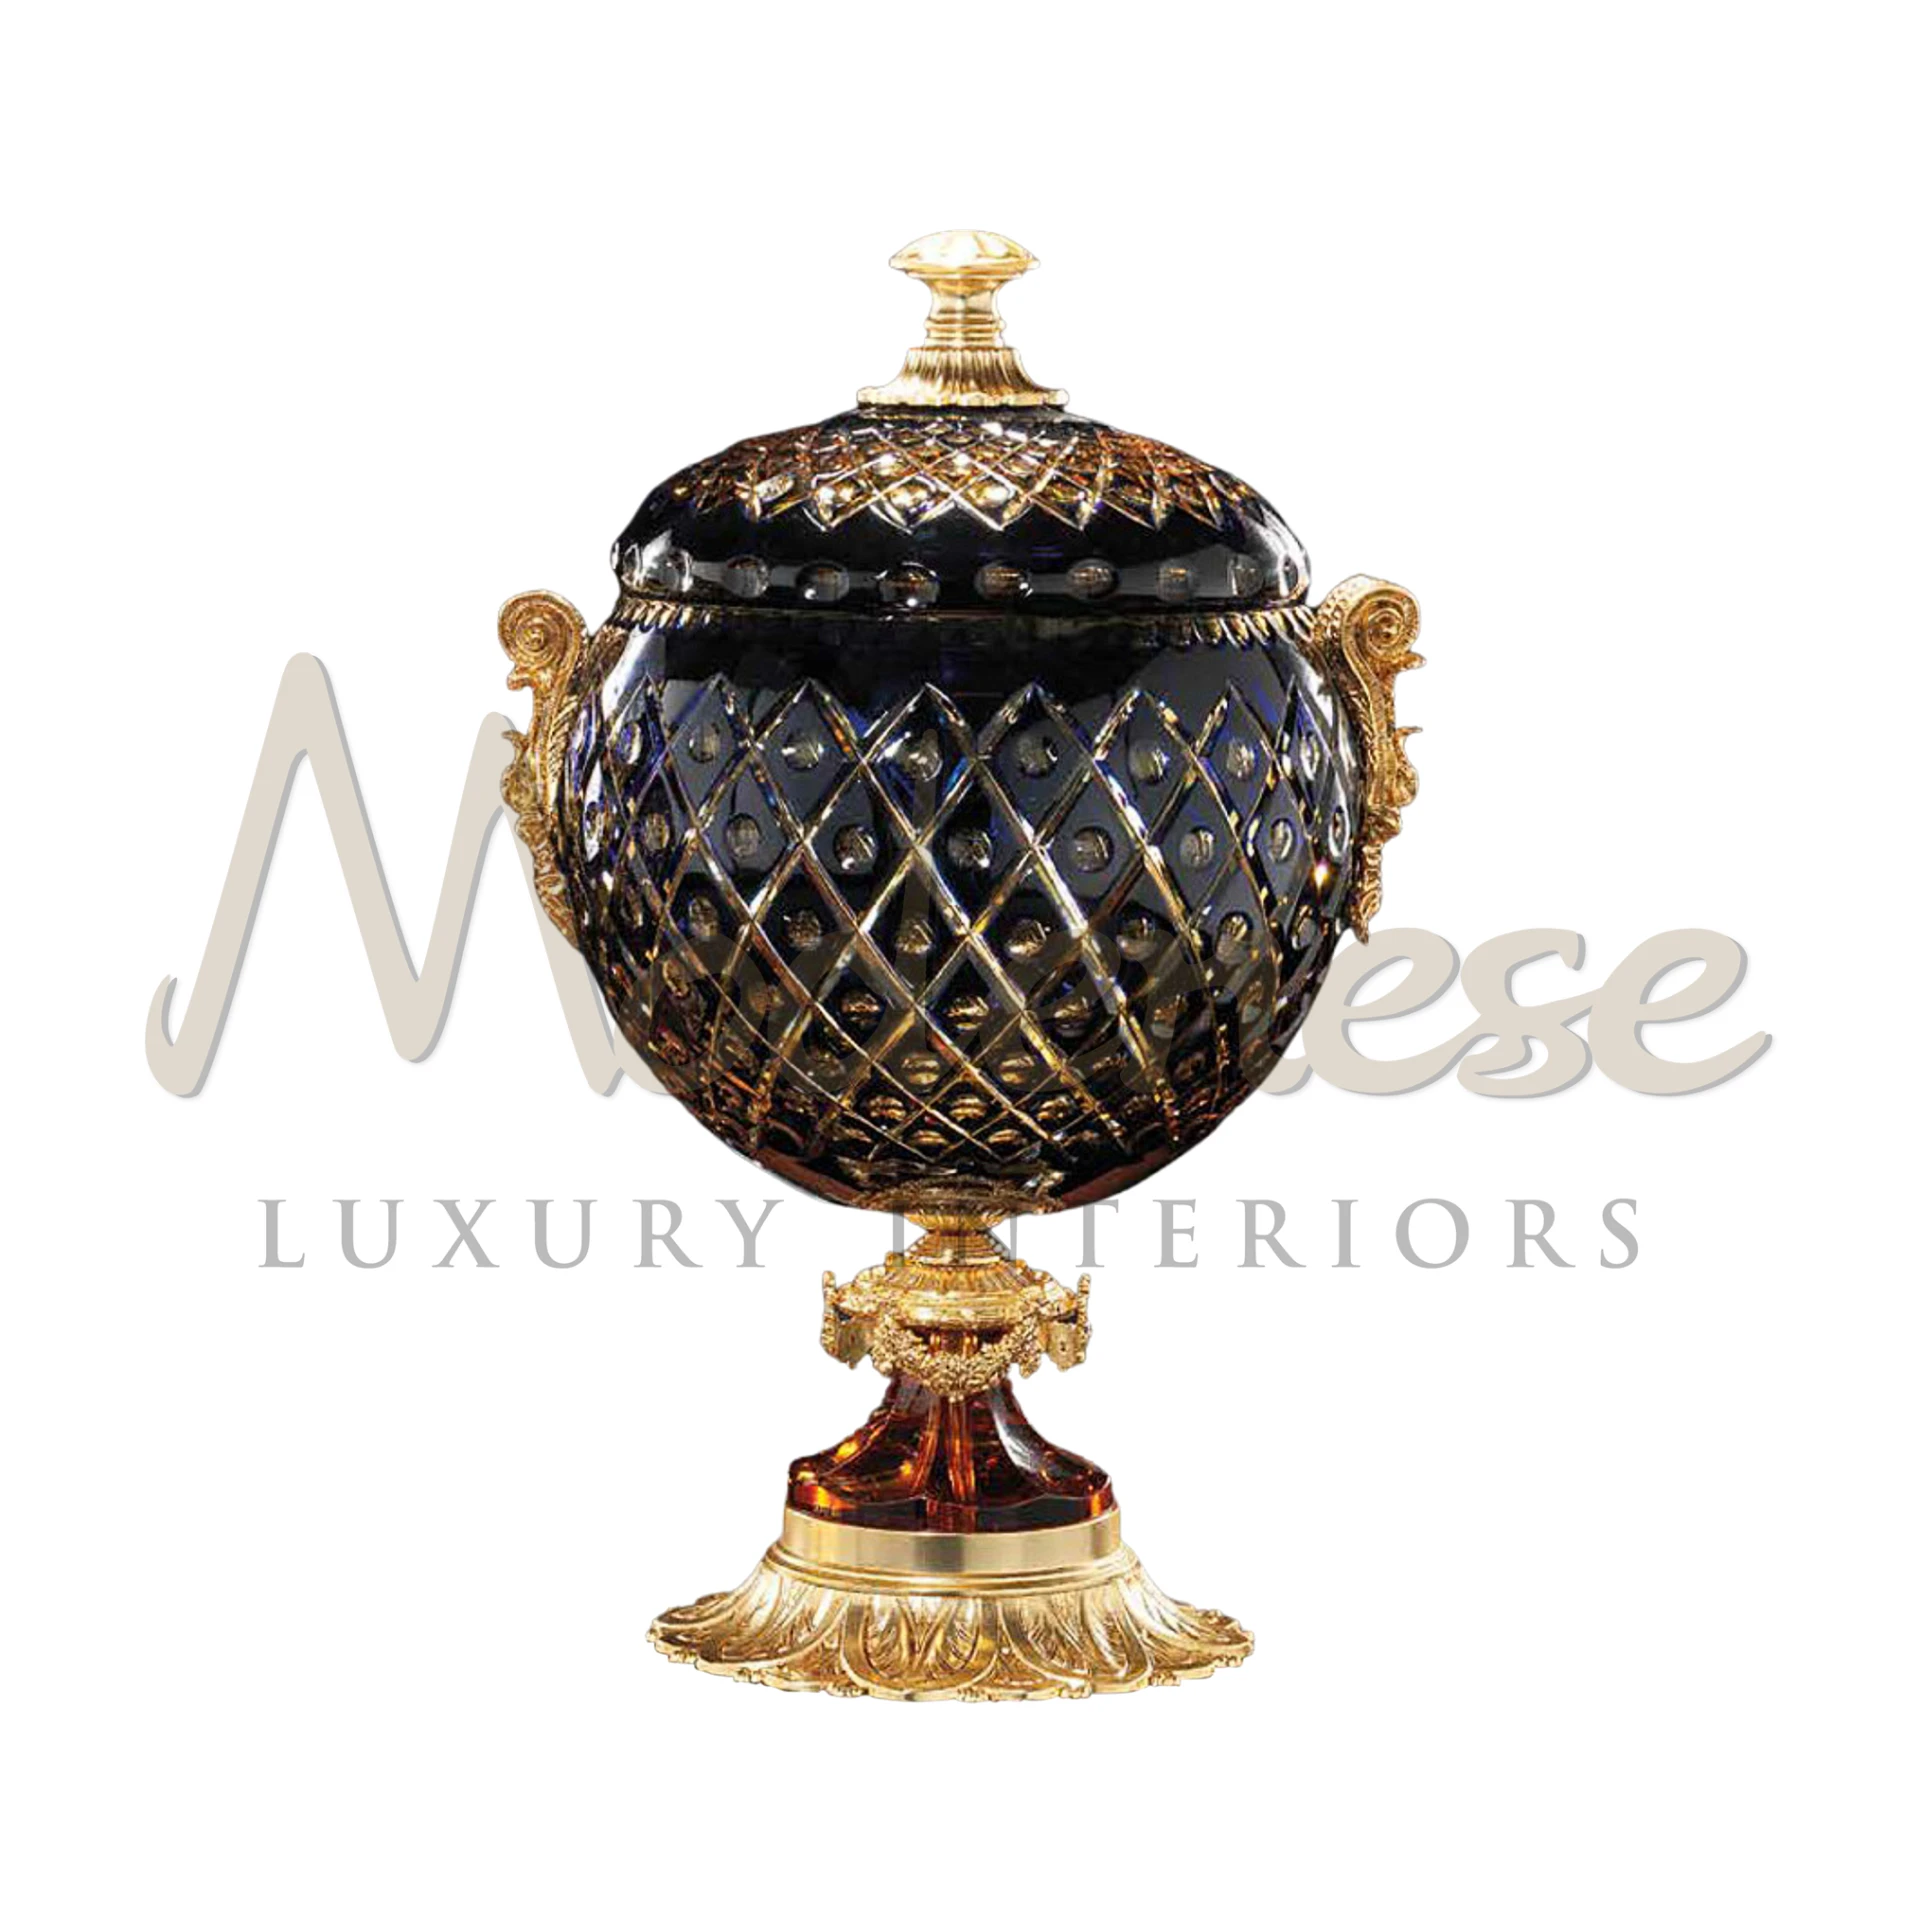 Victorian Black Glass Box by Modenese, featuring a classic design in dark glass, perfect for adding luxury to any interior.